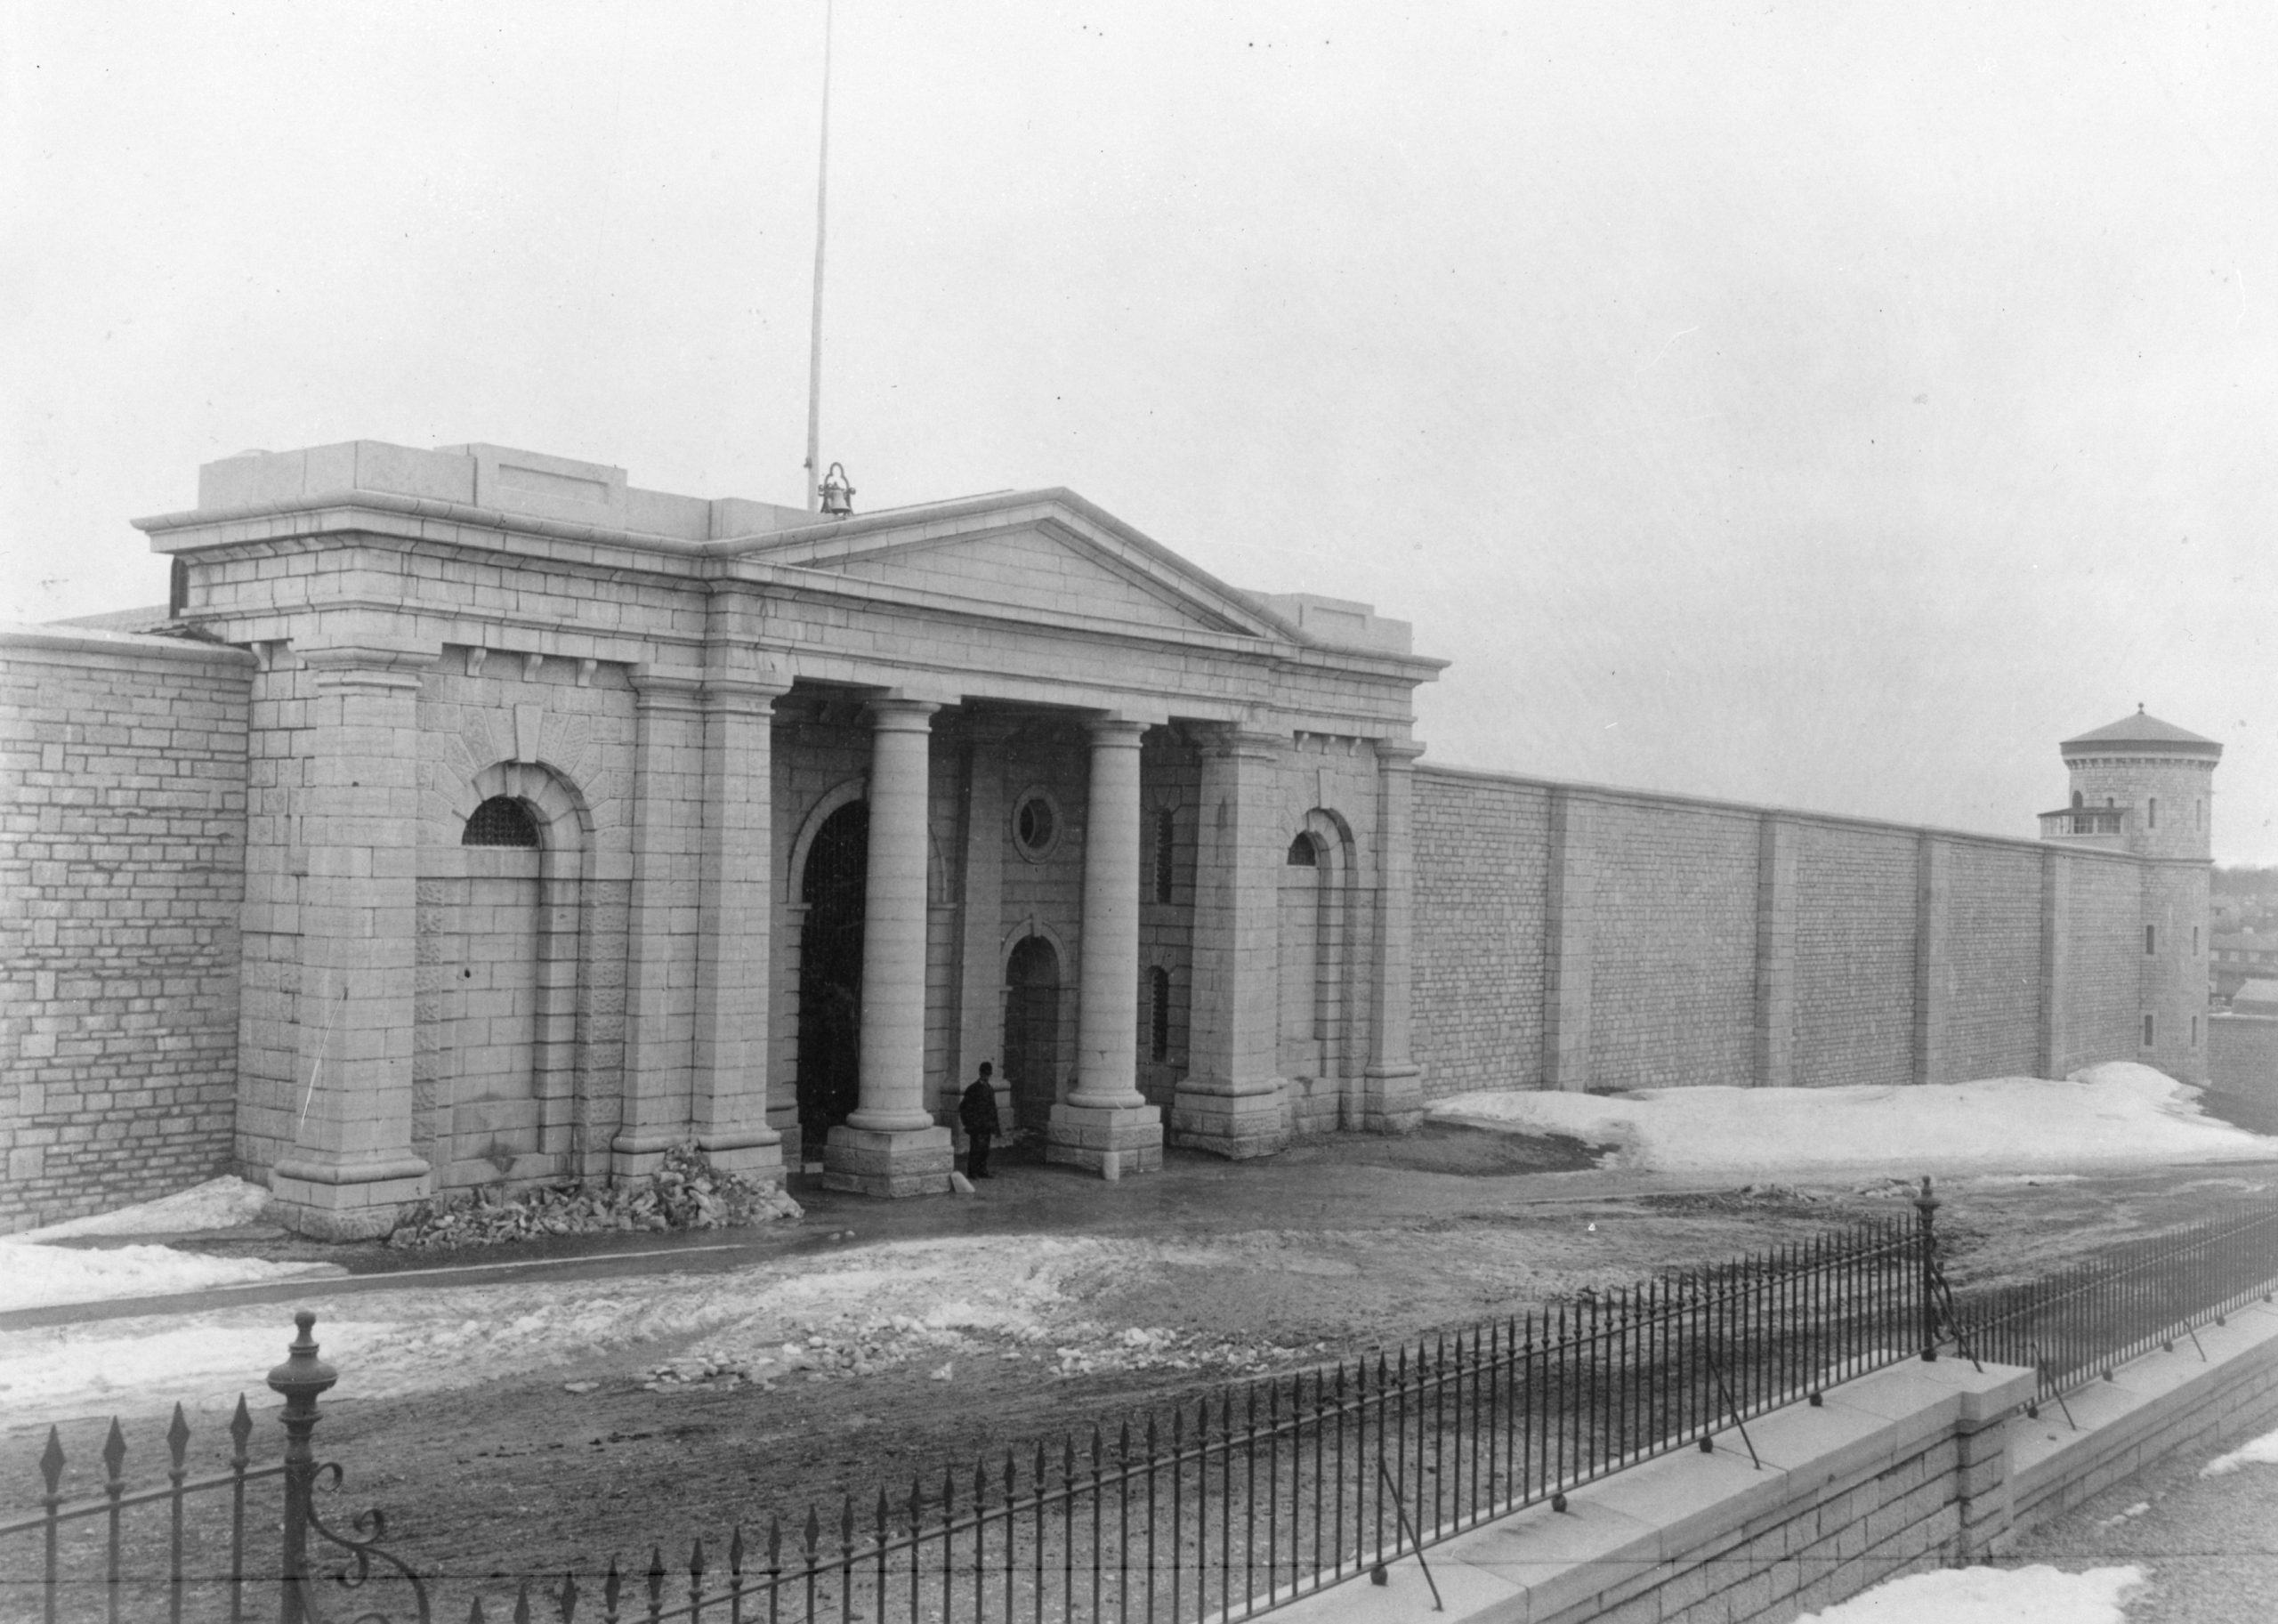 Kingston Penitentiary’s imposing North Gate in the 1880s. Photo credit: Library and Archives Canada PA-046244, courtesy of Canada’s Penitentiary Museum. 